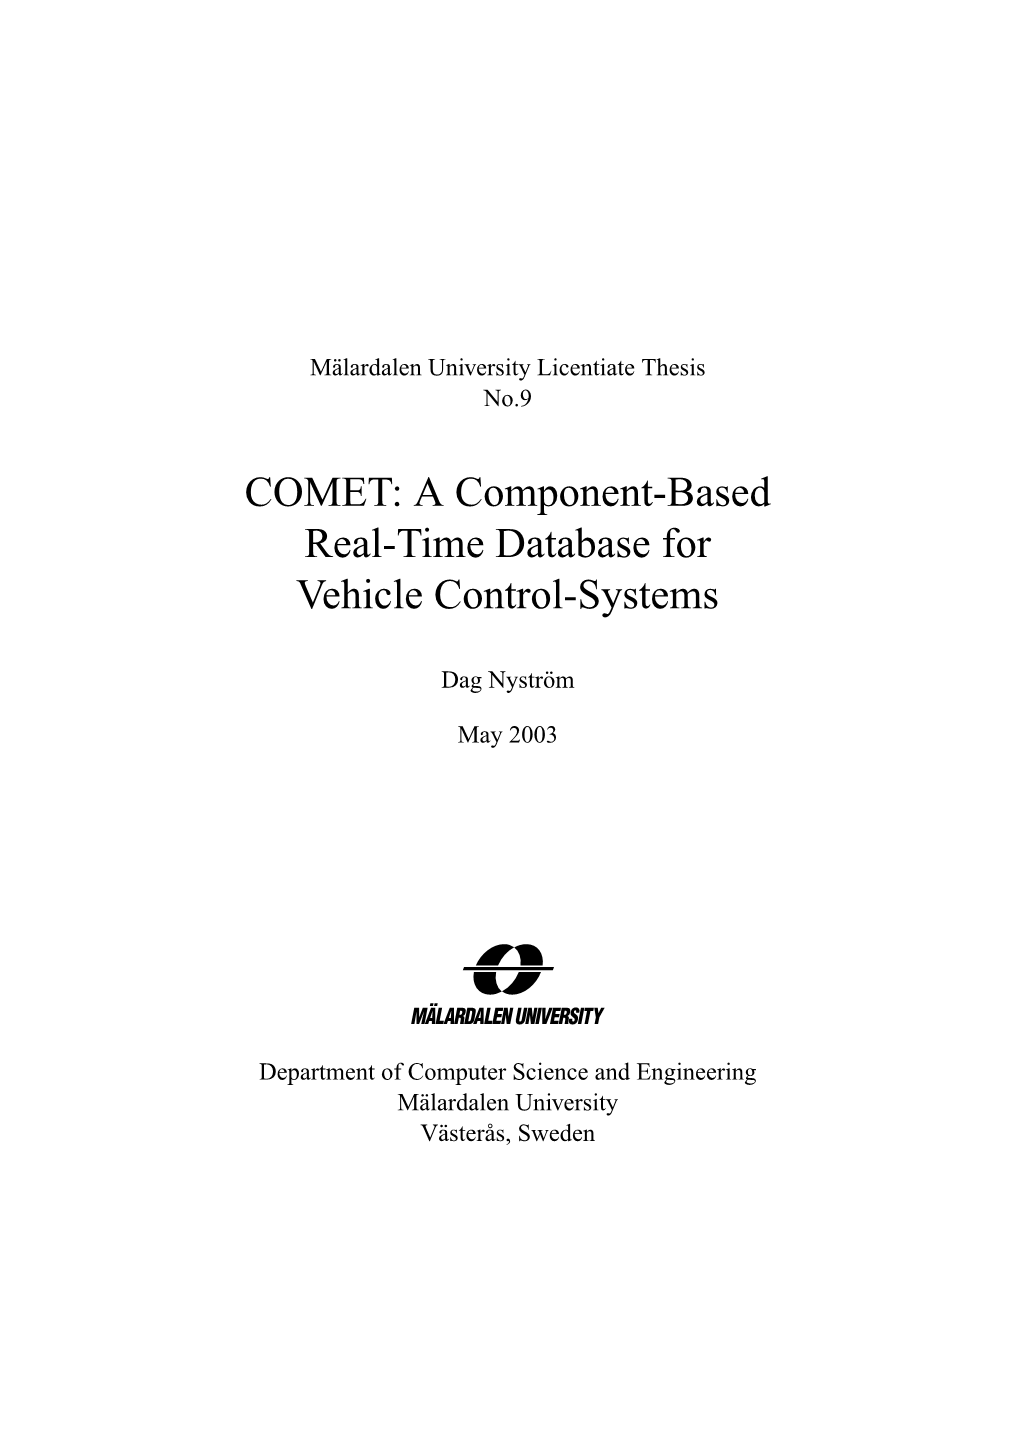 COMET: a Component-Based Real-Time Database for Vehicle Control-Systems